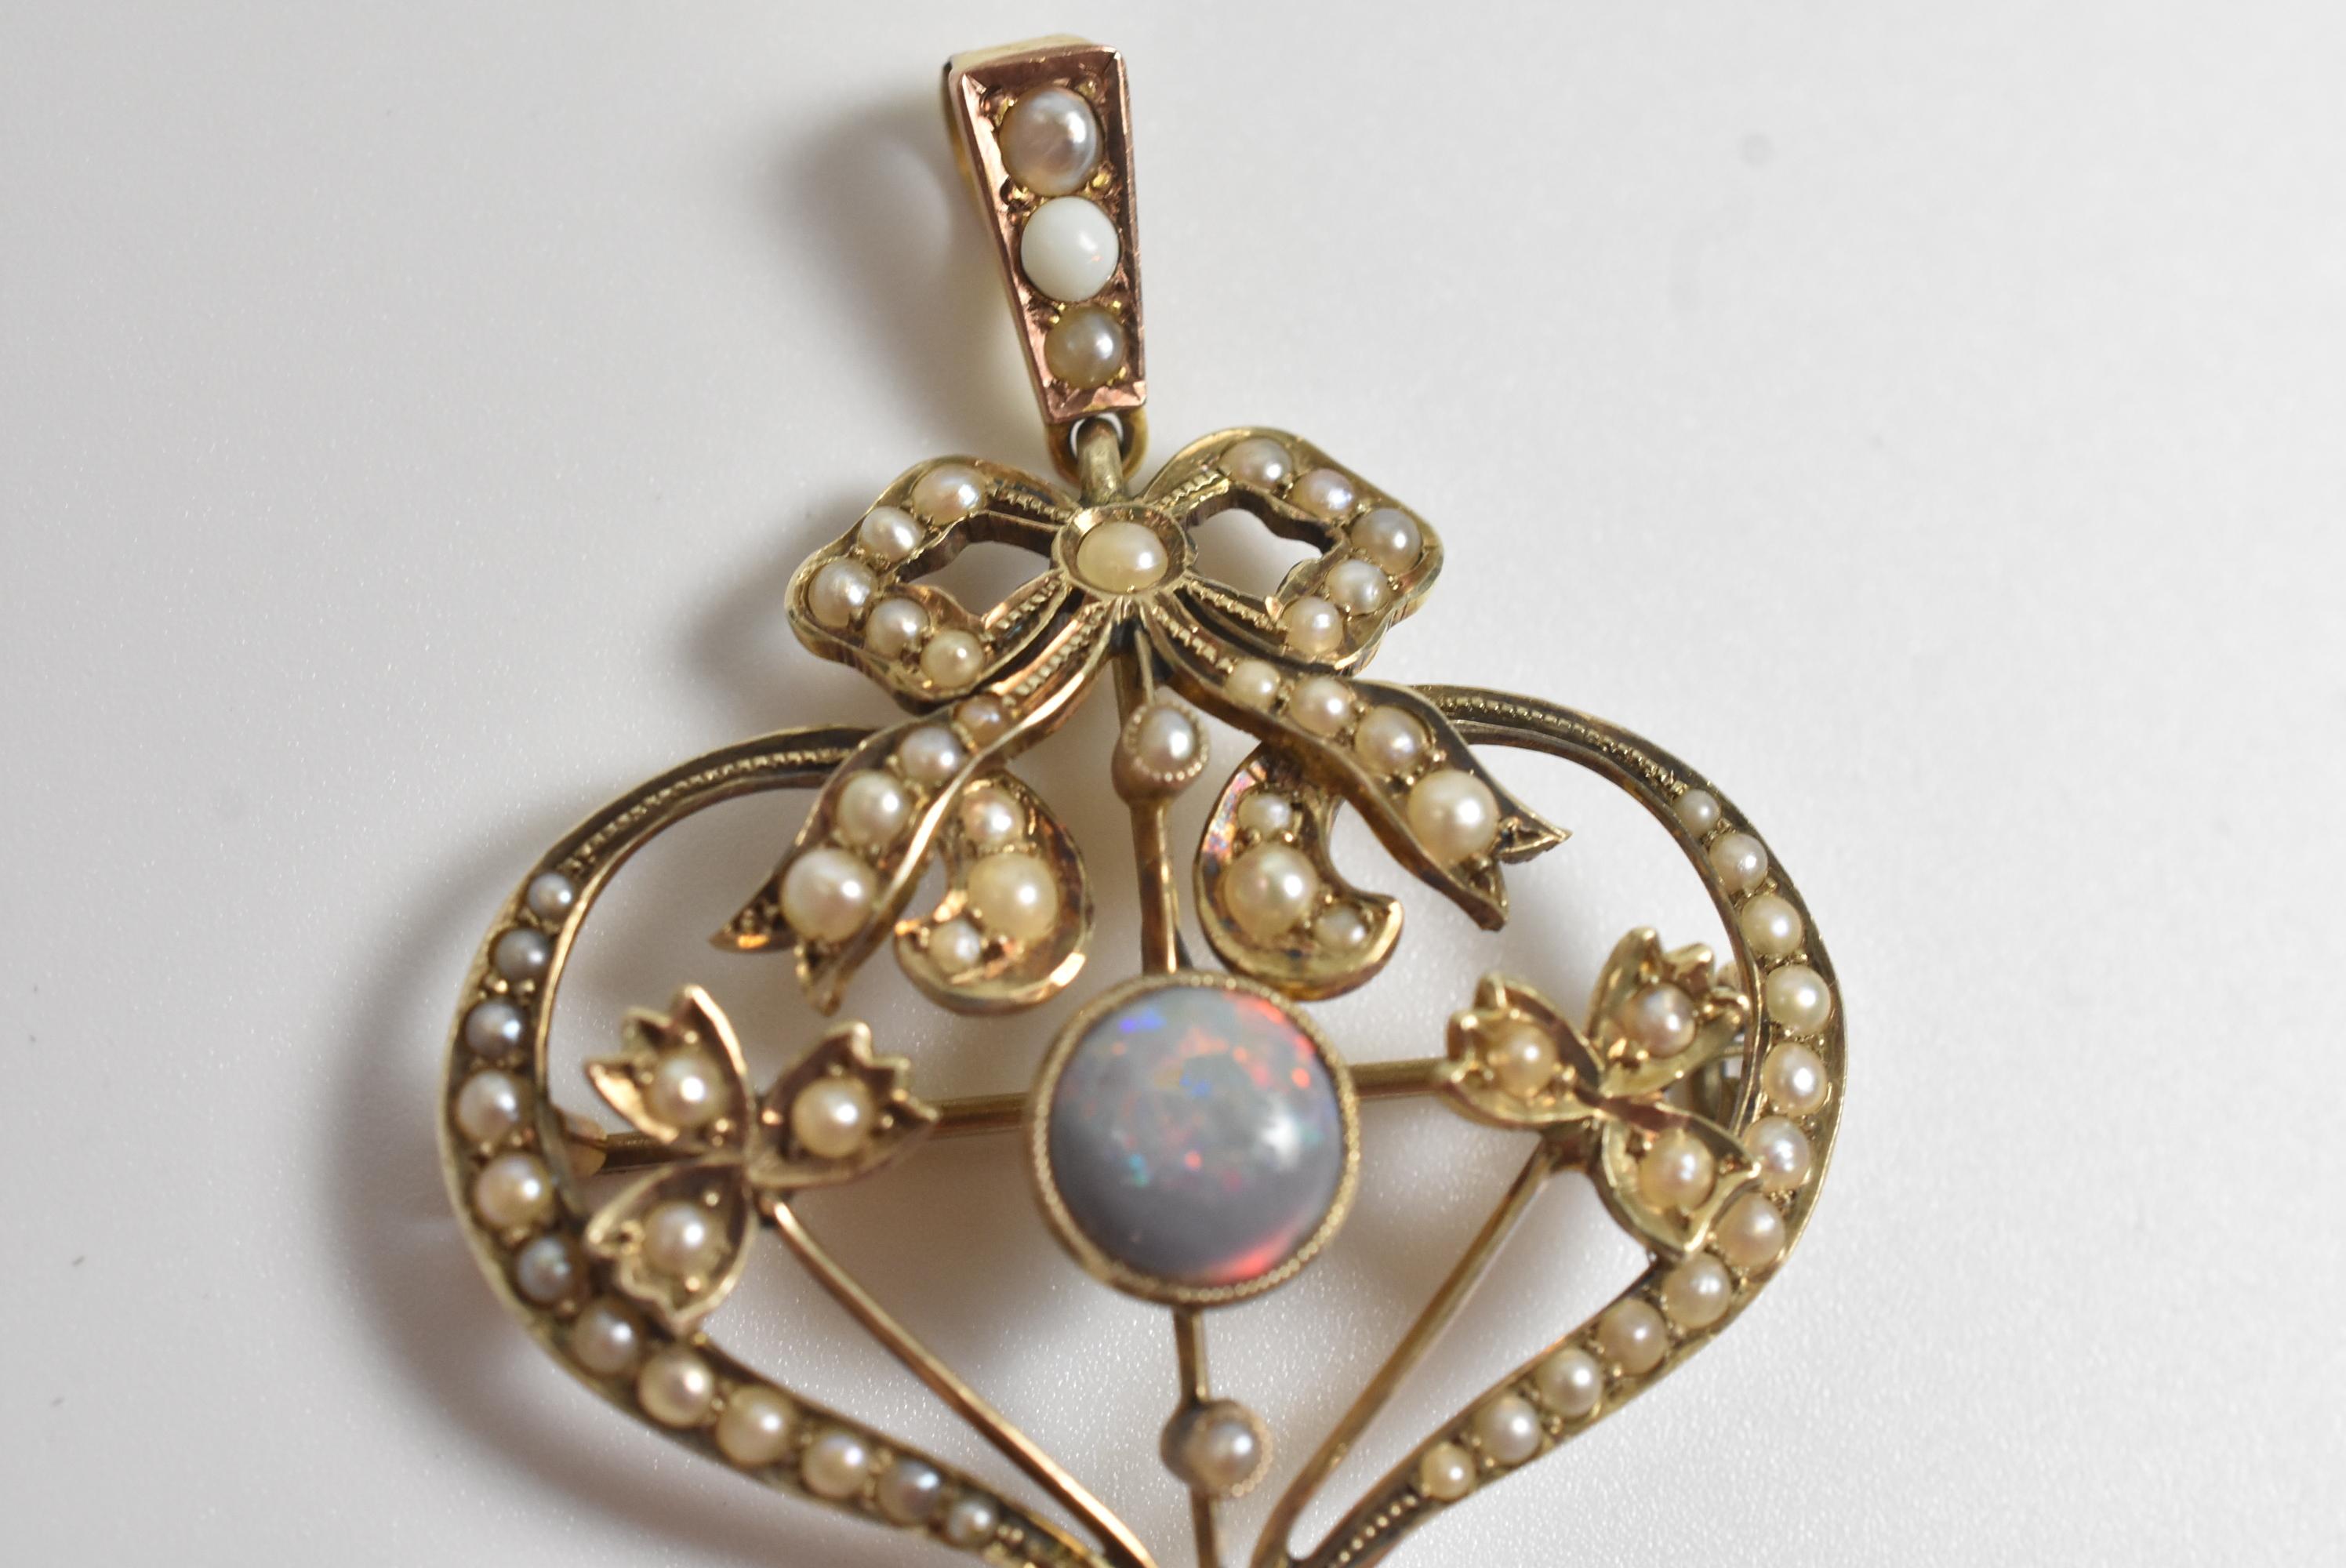 Early 20th Century 9-Karat Gold Edwardian Brooch or Pendant with Opals and Seed Pearl Accents